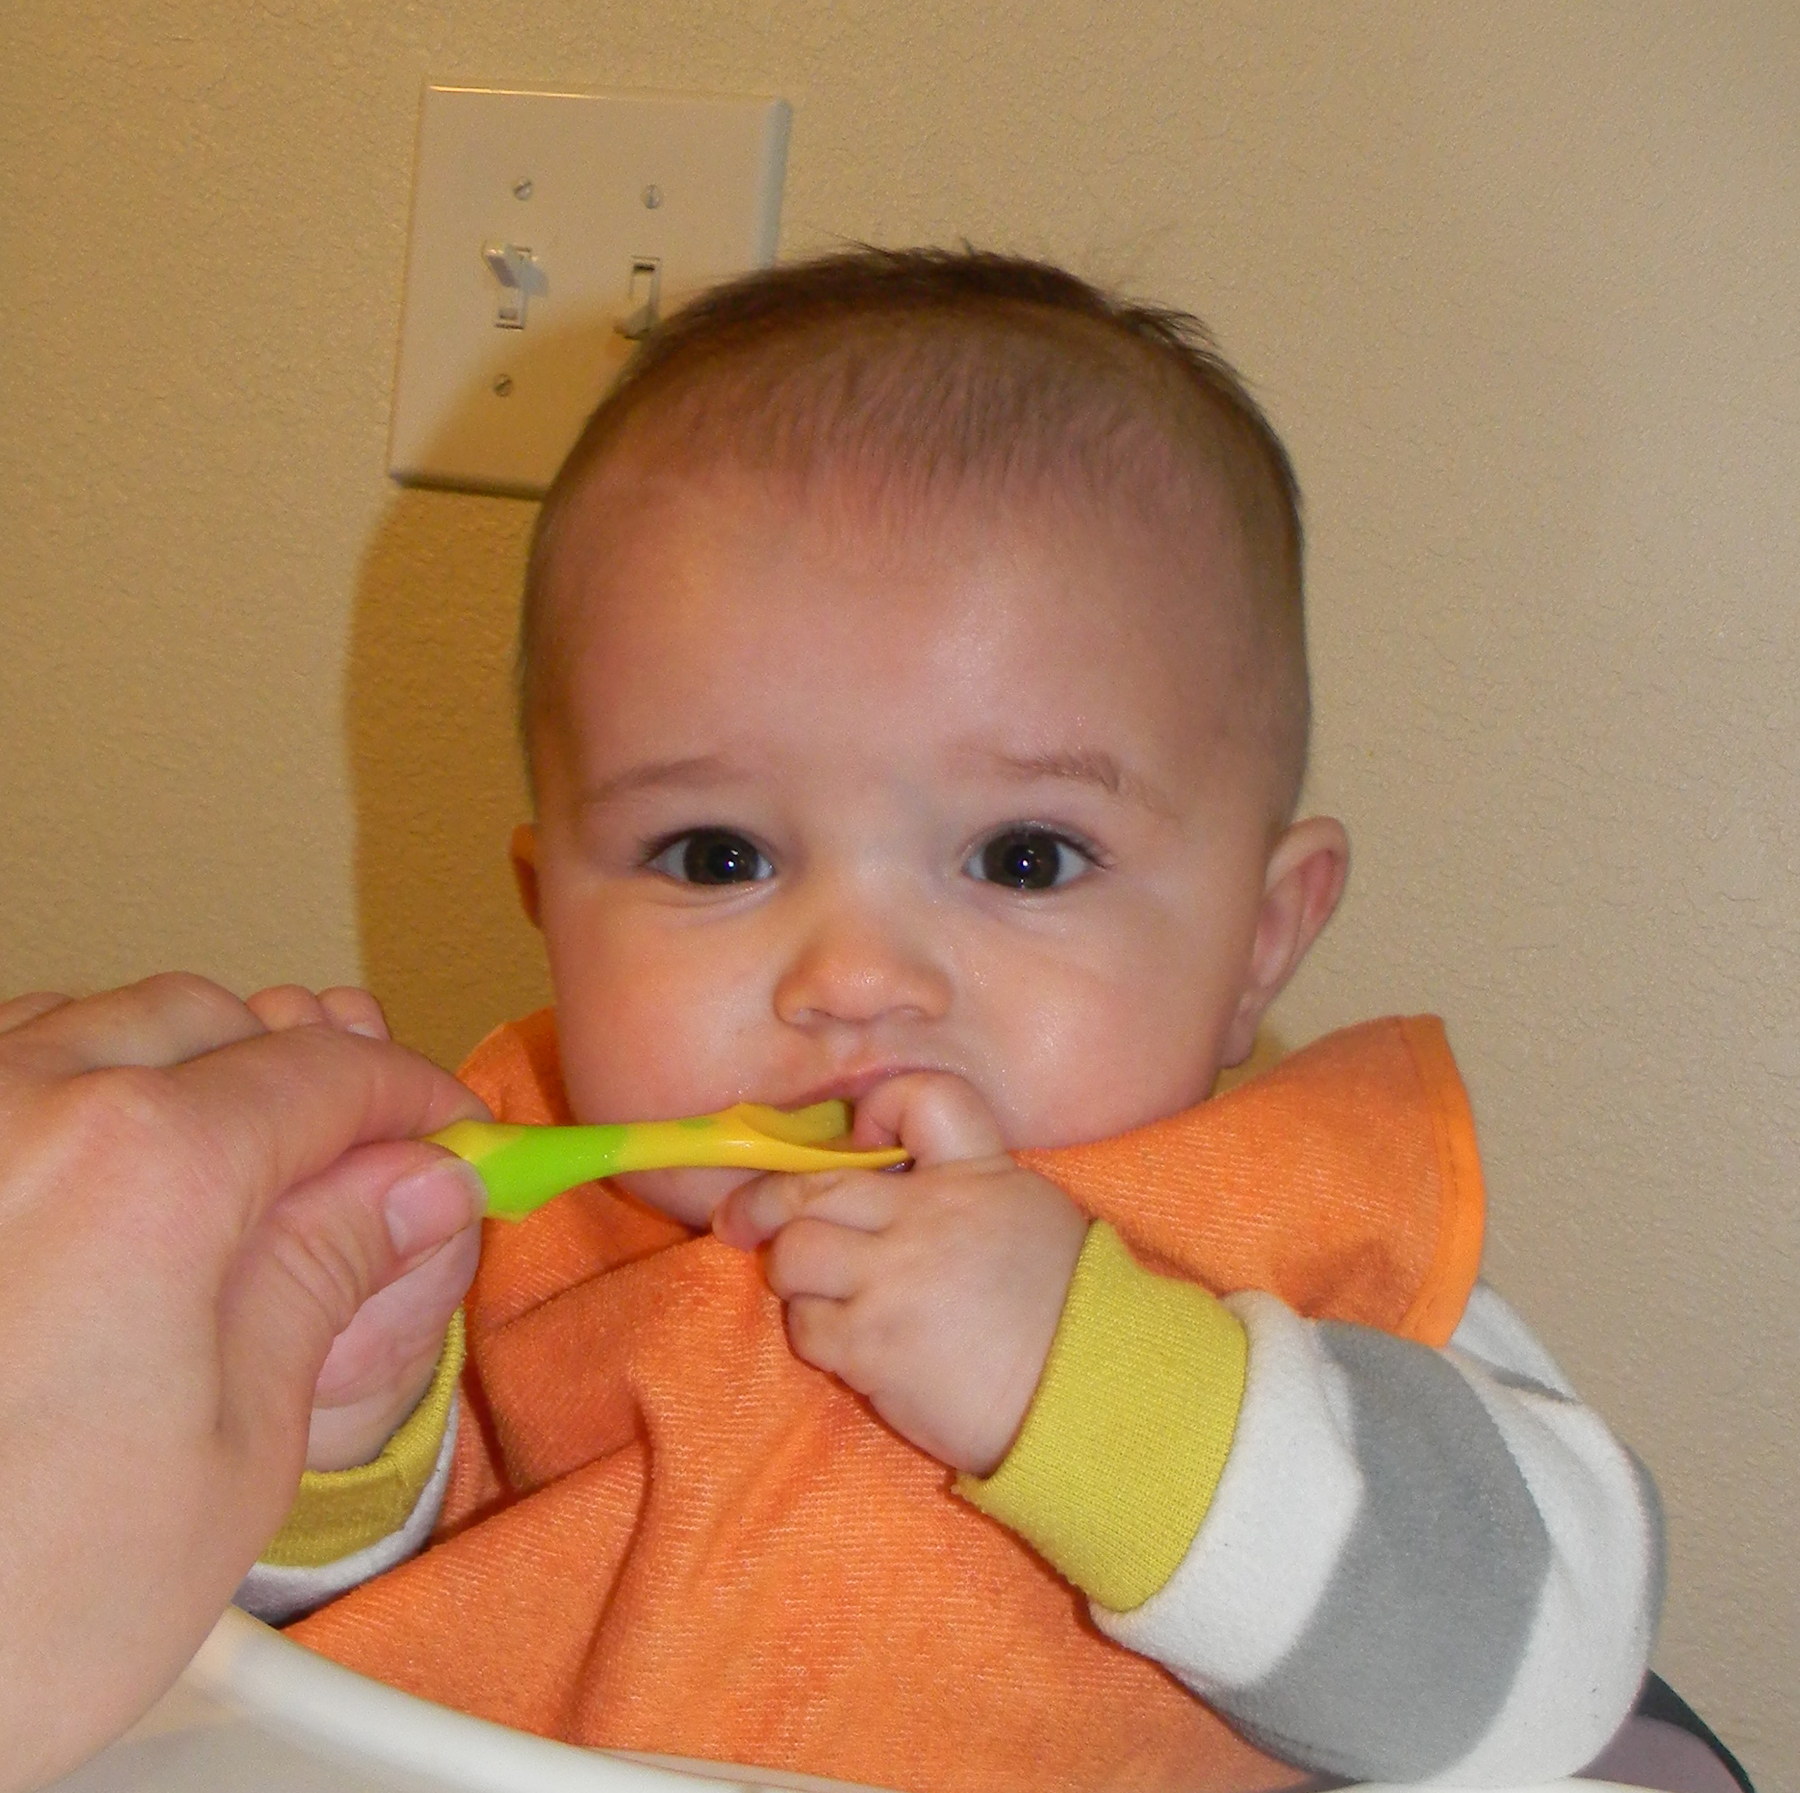 Li-Li joining our real food journey by devouring some no-sugar-added applesauce :)